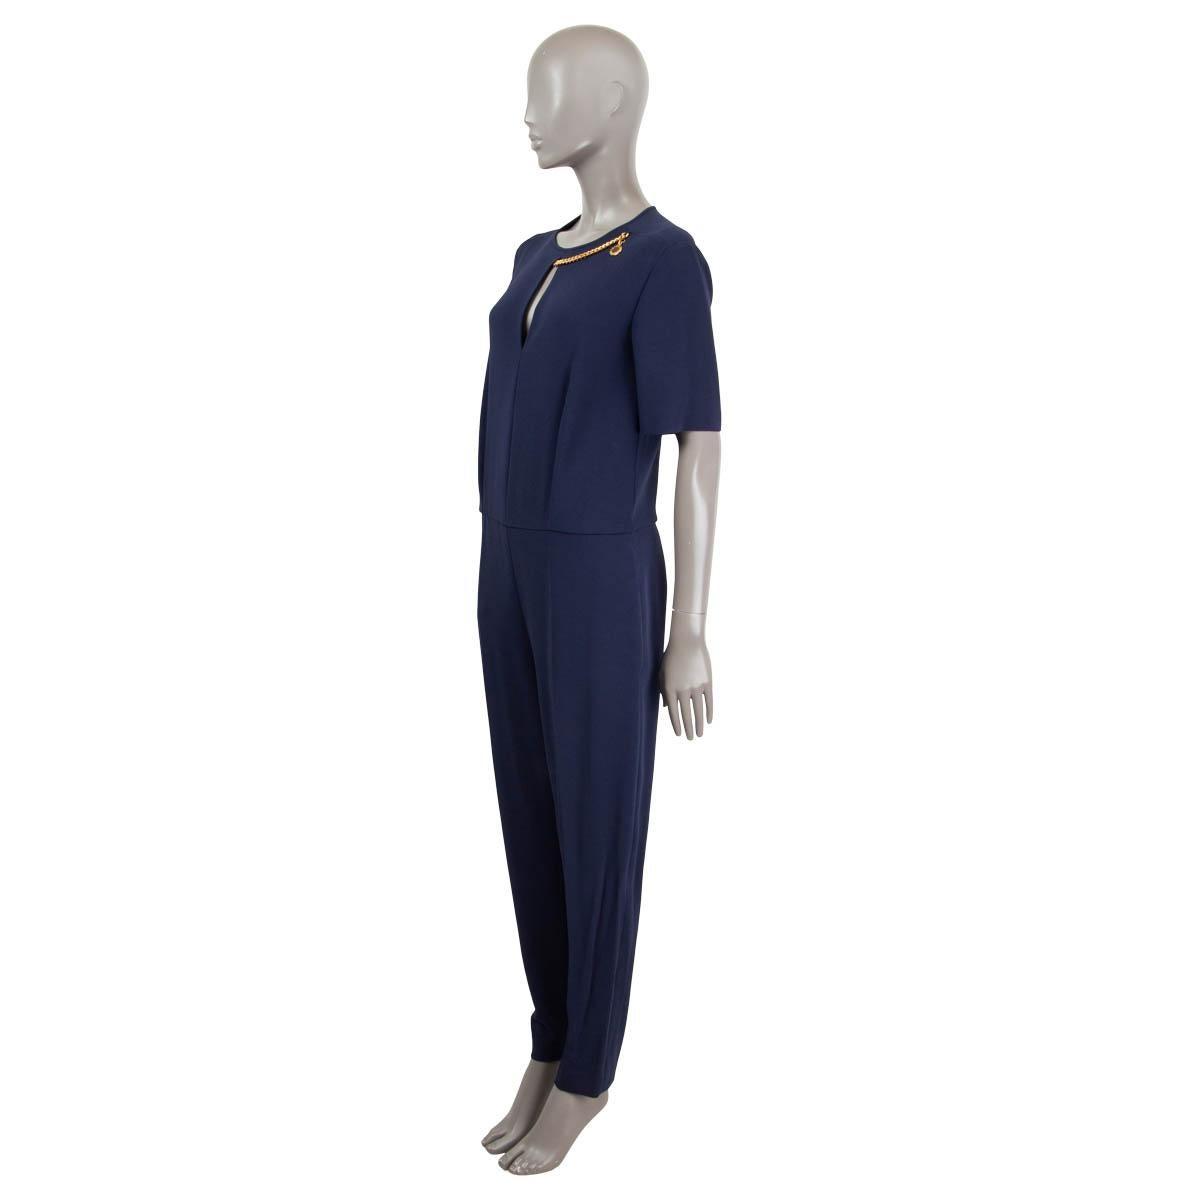 100% authentic Stella McCartney Jumpsuit in navy blue viscose (64%), acetate (32%) and elastane (4%).. Features a  round collar with a chain detail and wide-legs. Opens with a zipper on the back. Two sit pockets on the side. Has been worn and is in